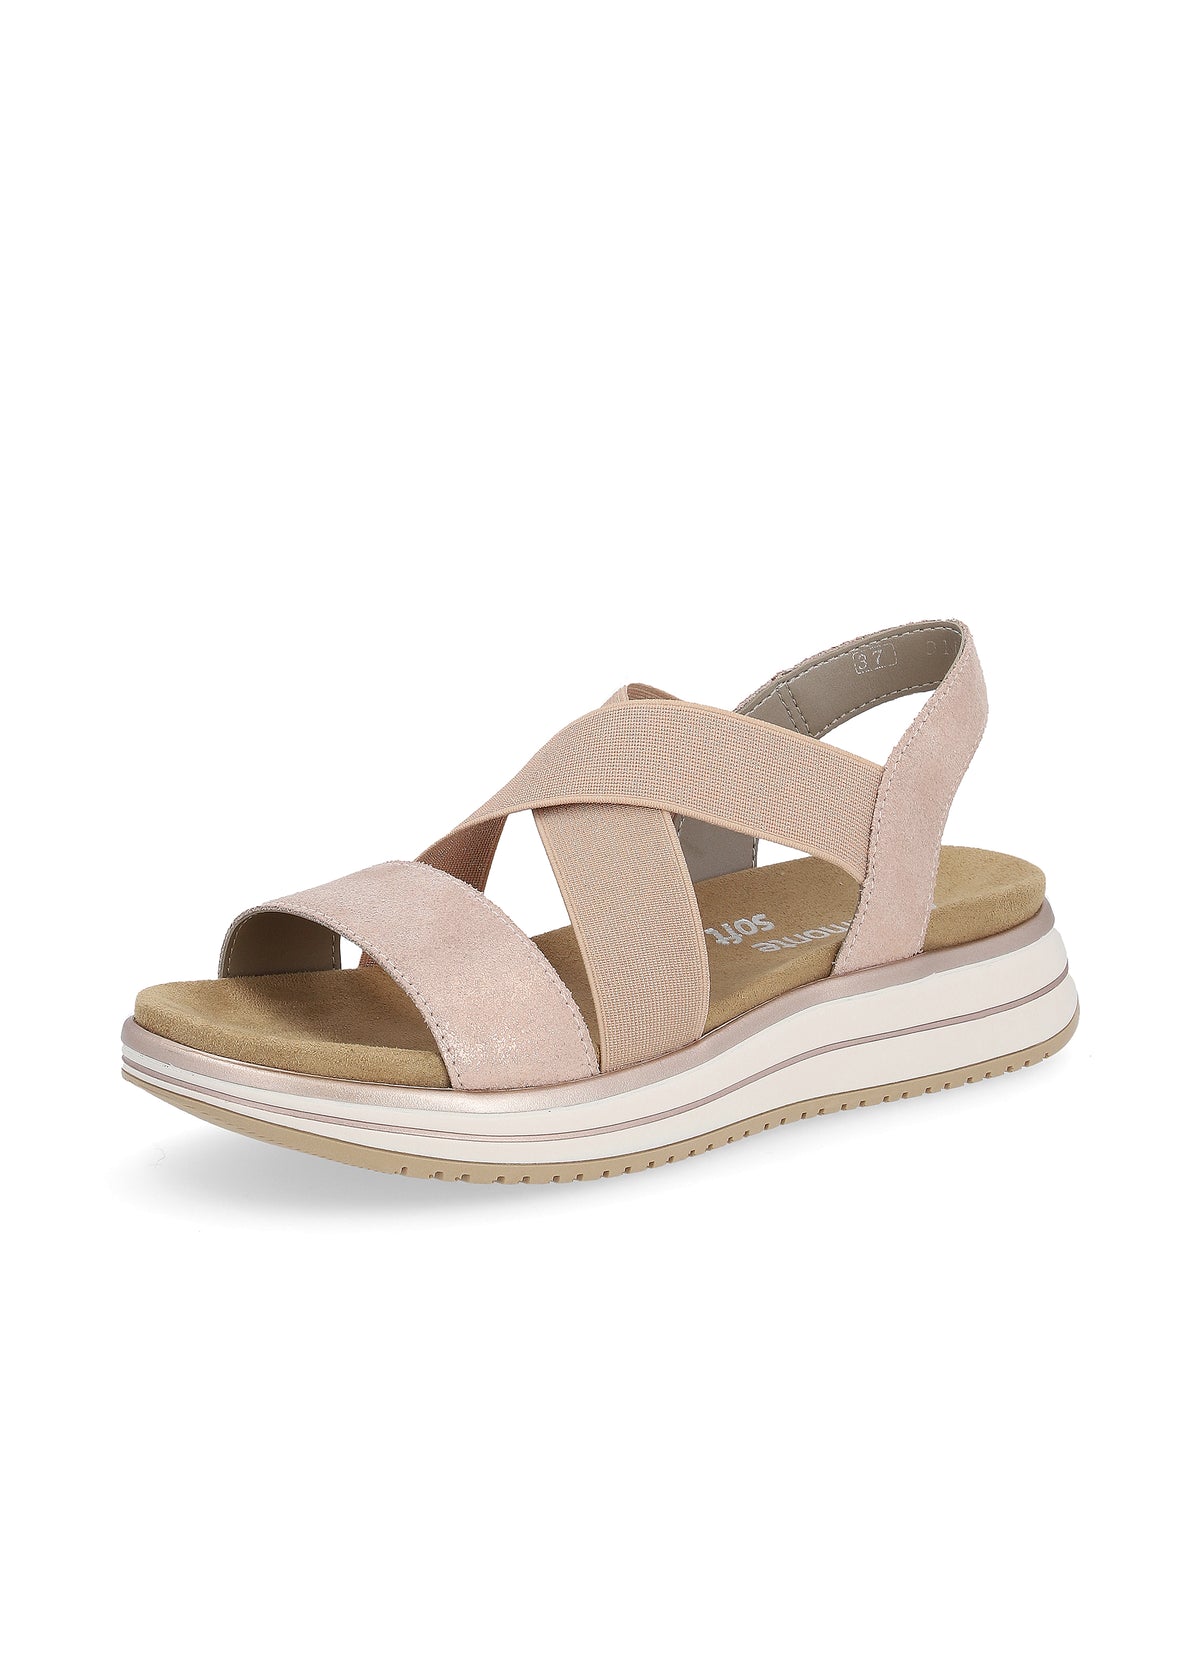 Sandals with a thick sole - nude, rose gold, elastic straps